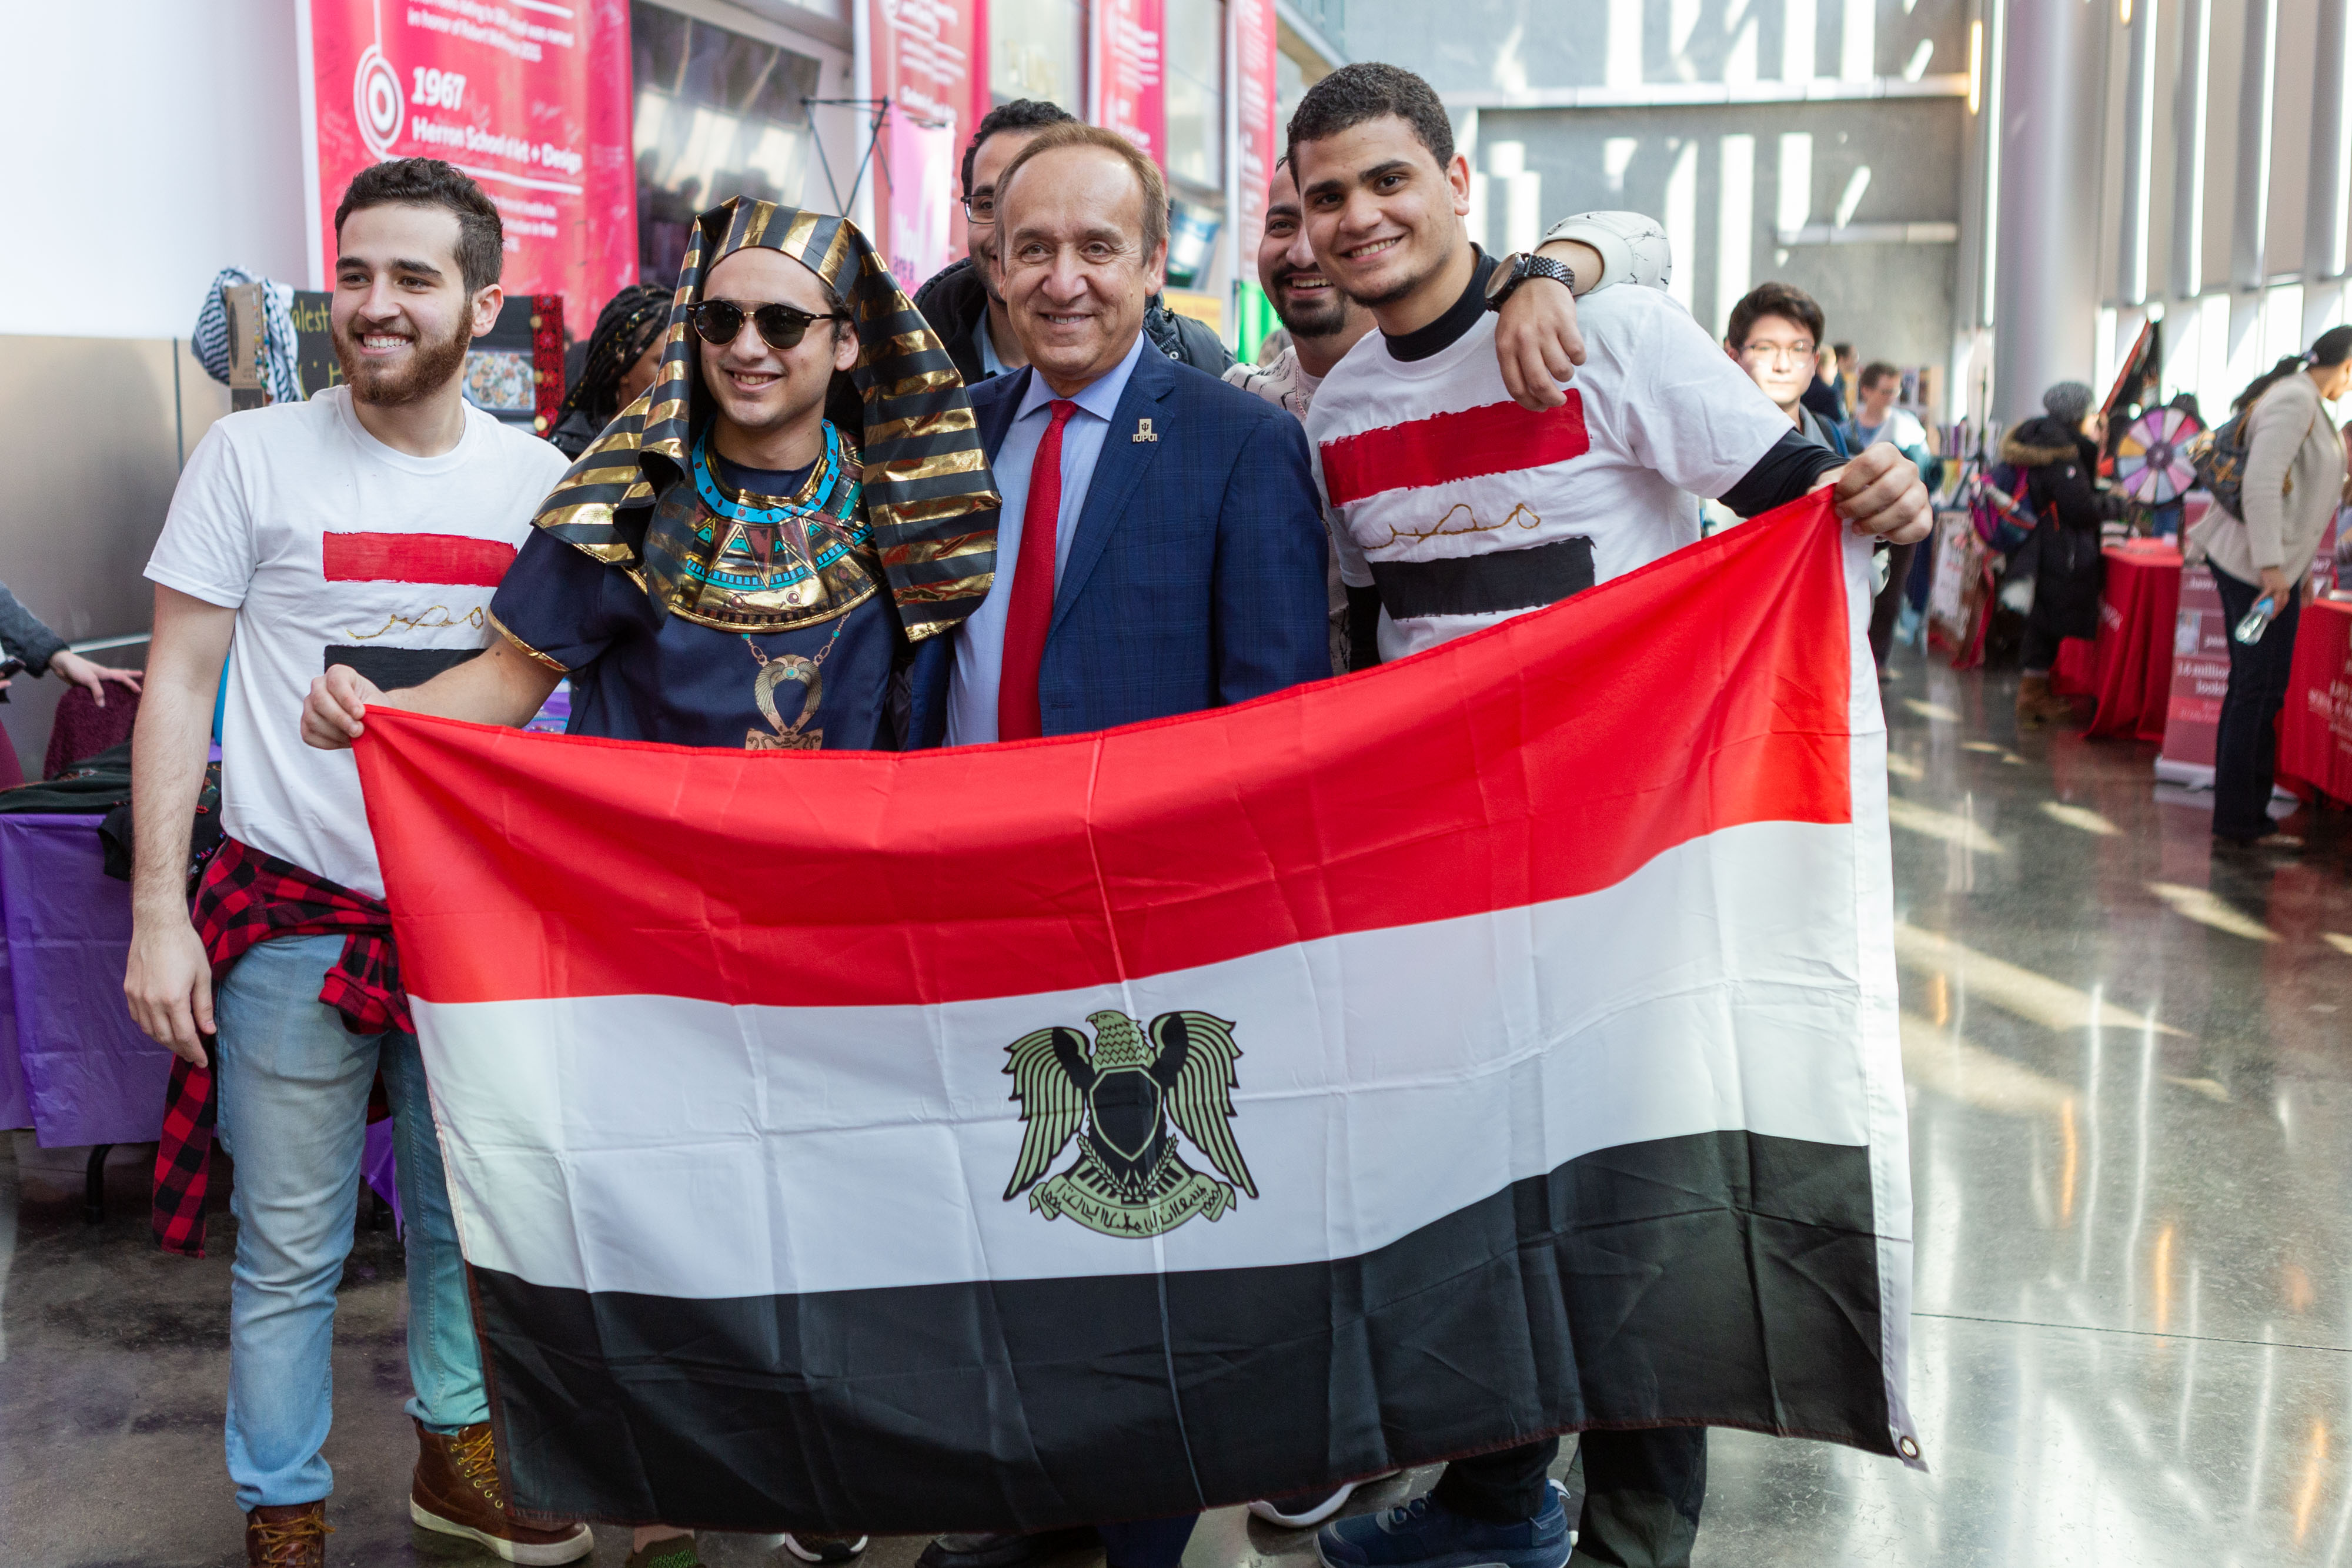 Chancellor Paydar with the Egyptian Student Association